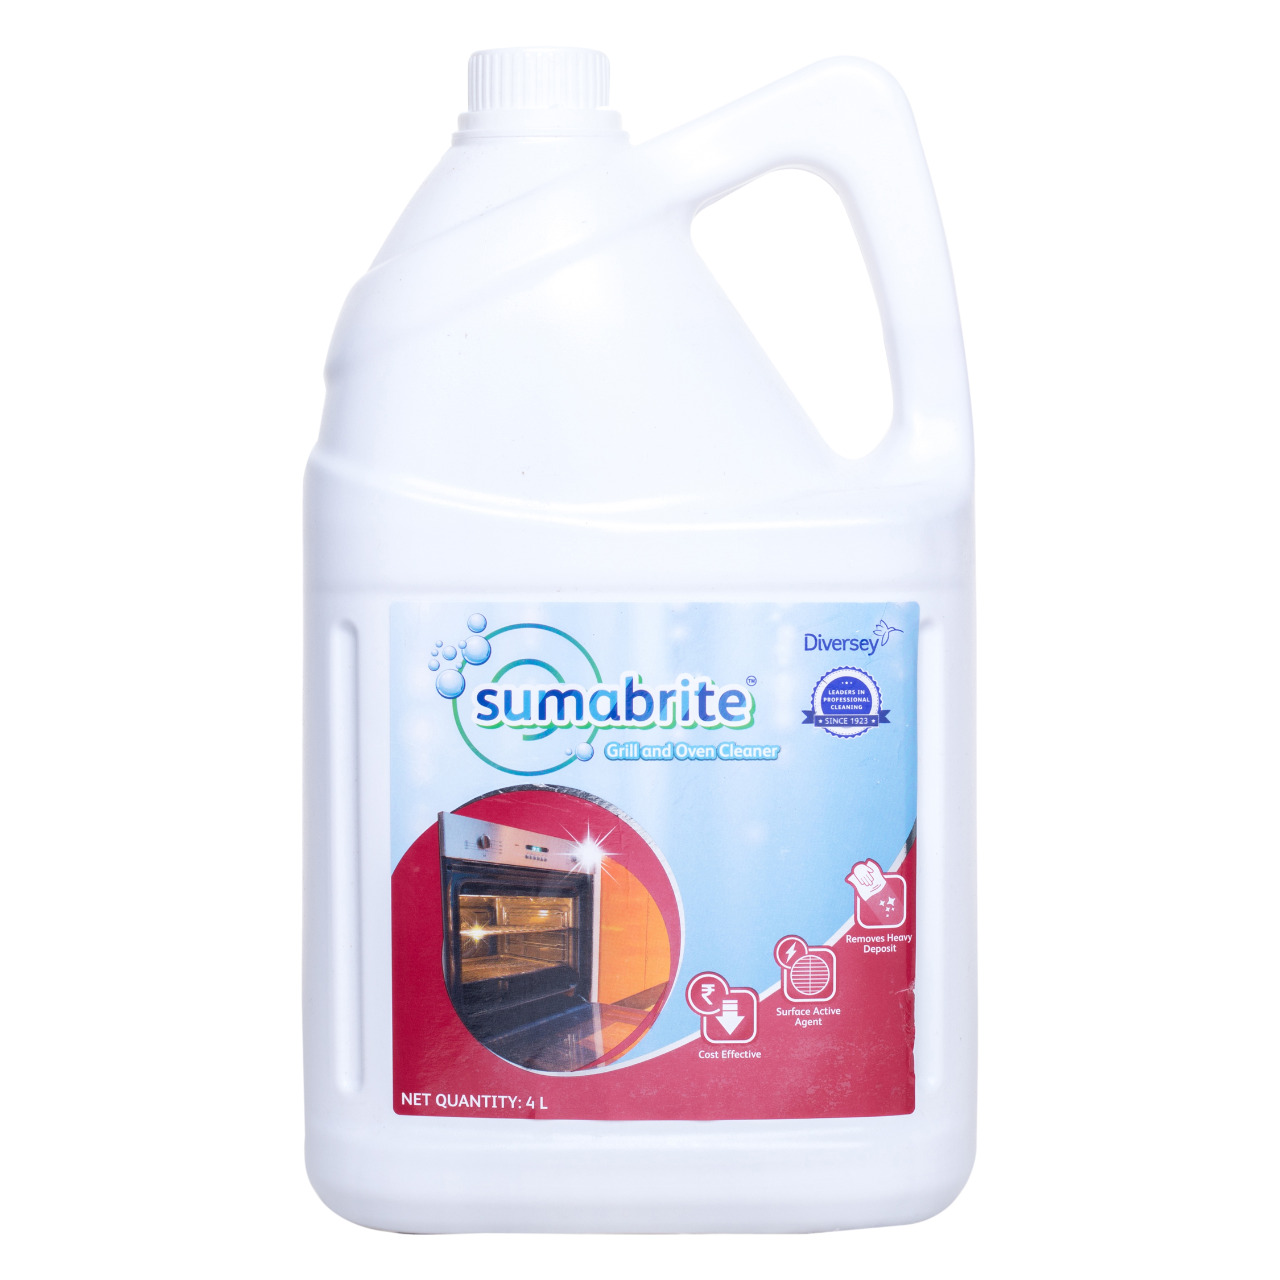 Sumabrite Grill Oven Cleaner - 5 Ltr